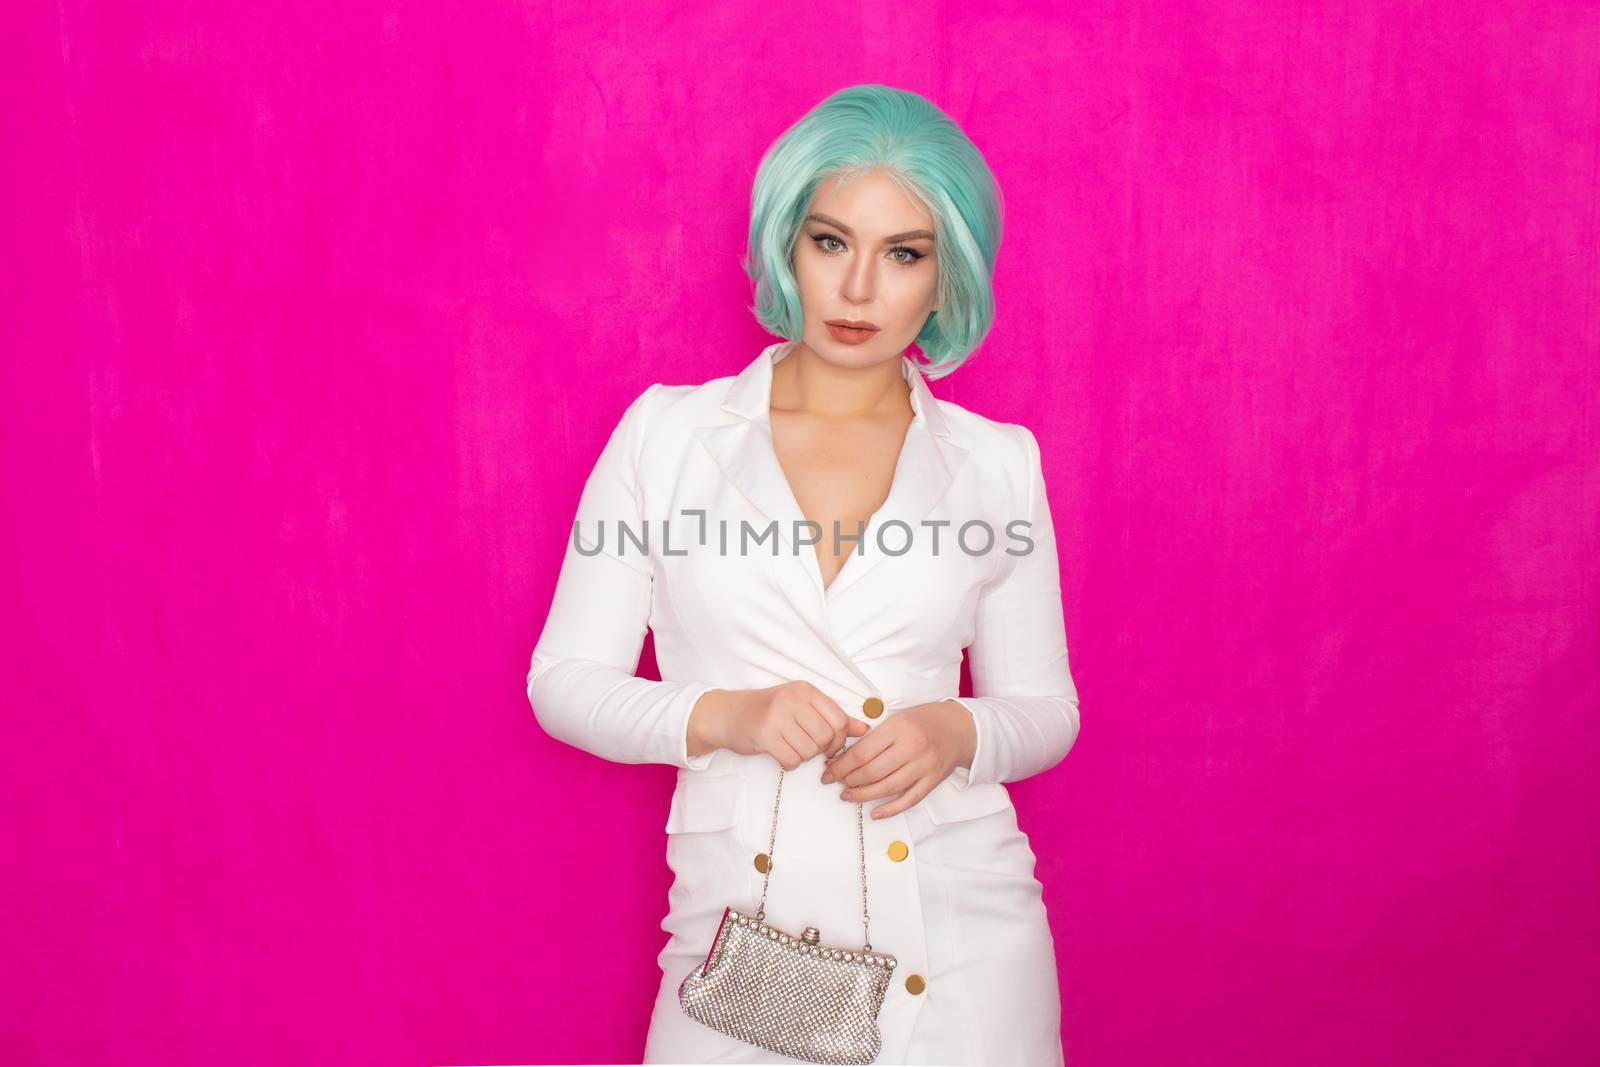 Beautiful young woman with menthol short hair in a white business jacket dress holding a silver small handbag